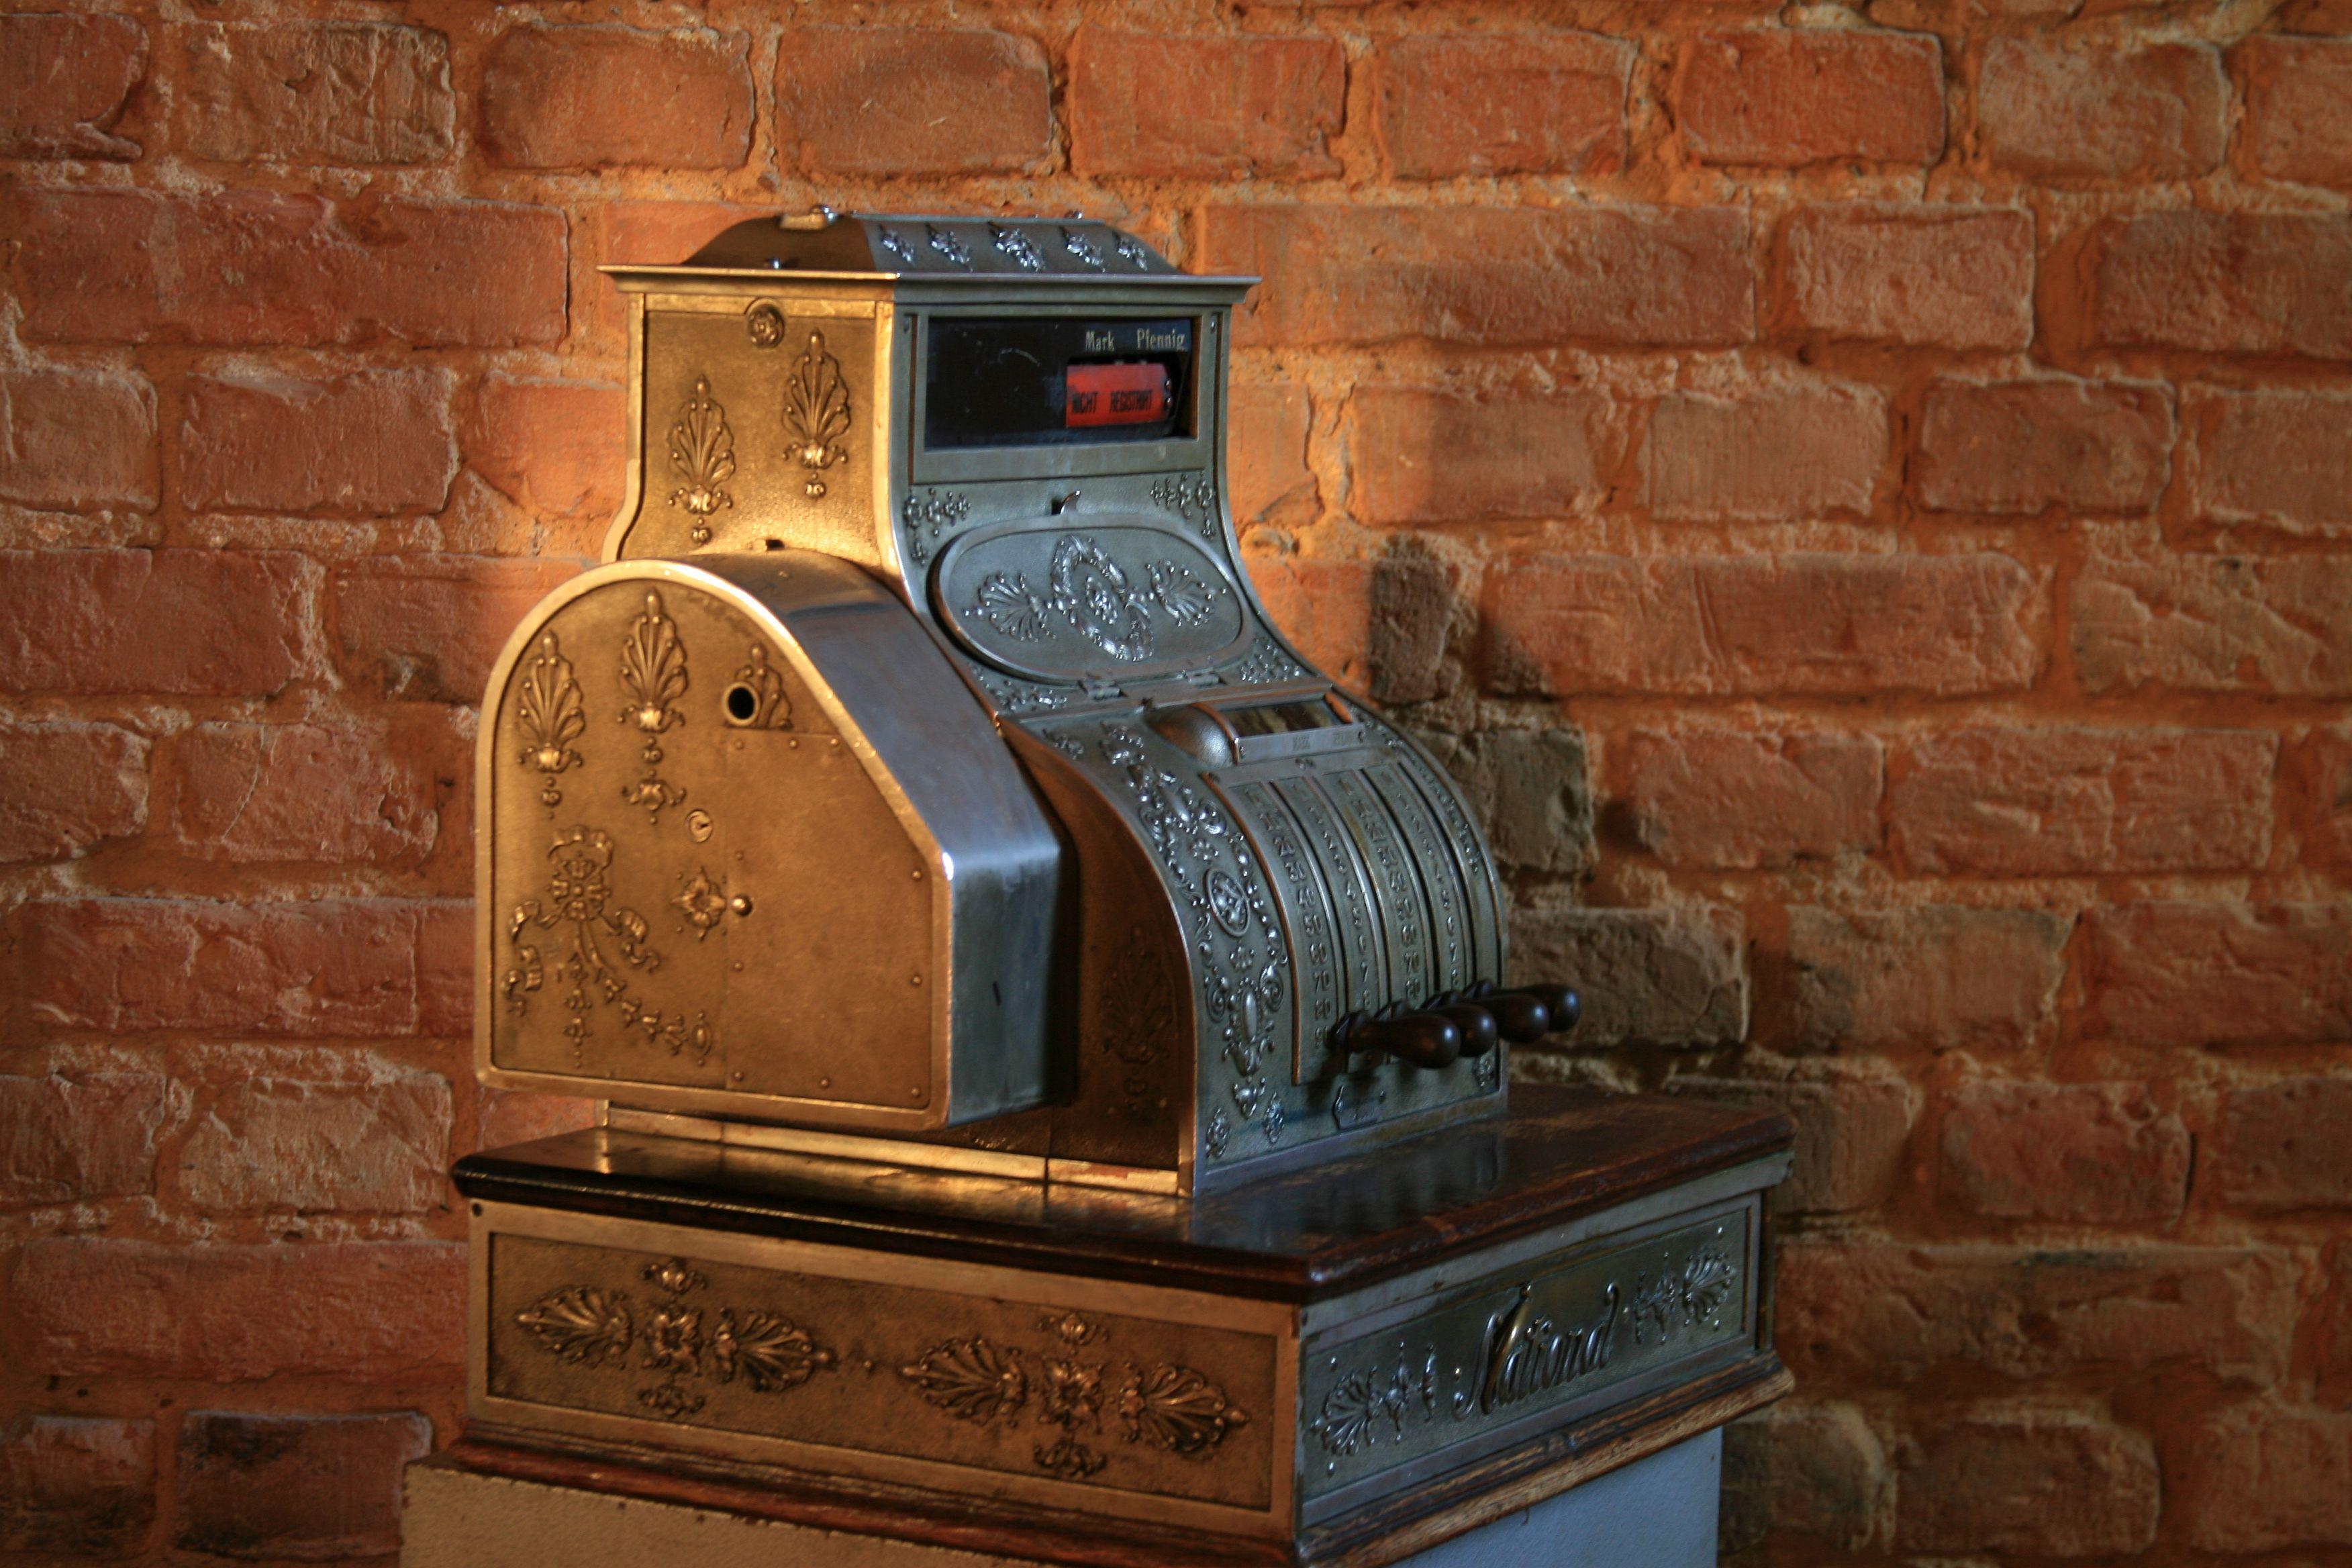 German National store cash register from the 1930s.
Construction:
The cash register's casing is made of a steel cast covered with a layer of chrome. The basis is a wooden chest with a cash drawer in it.
The offered cash register does not meet its